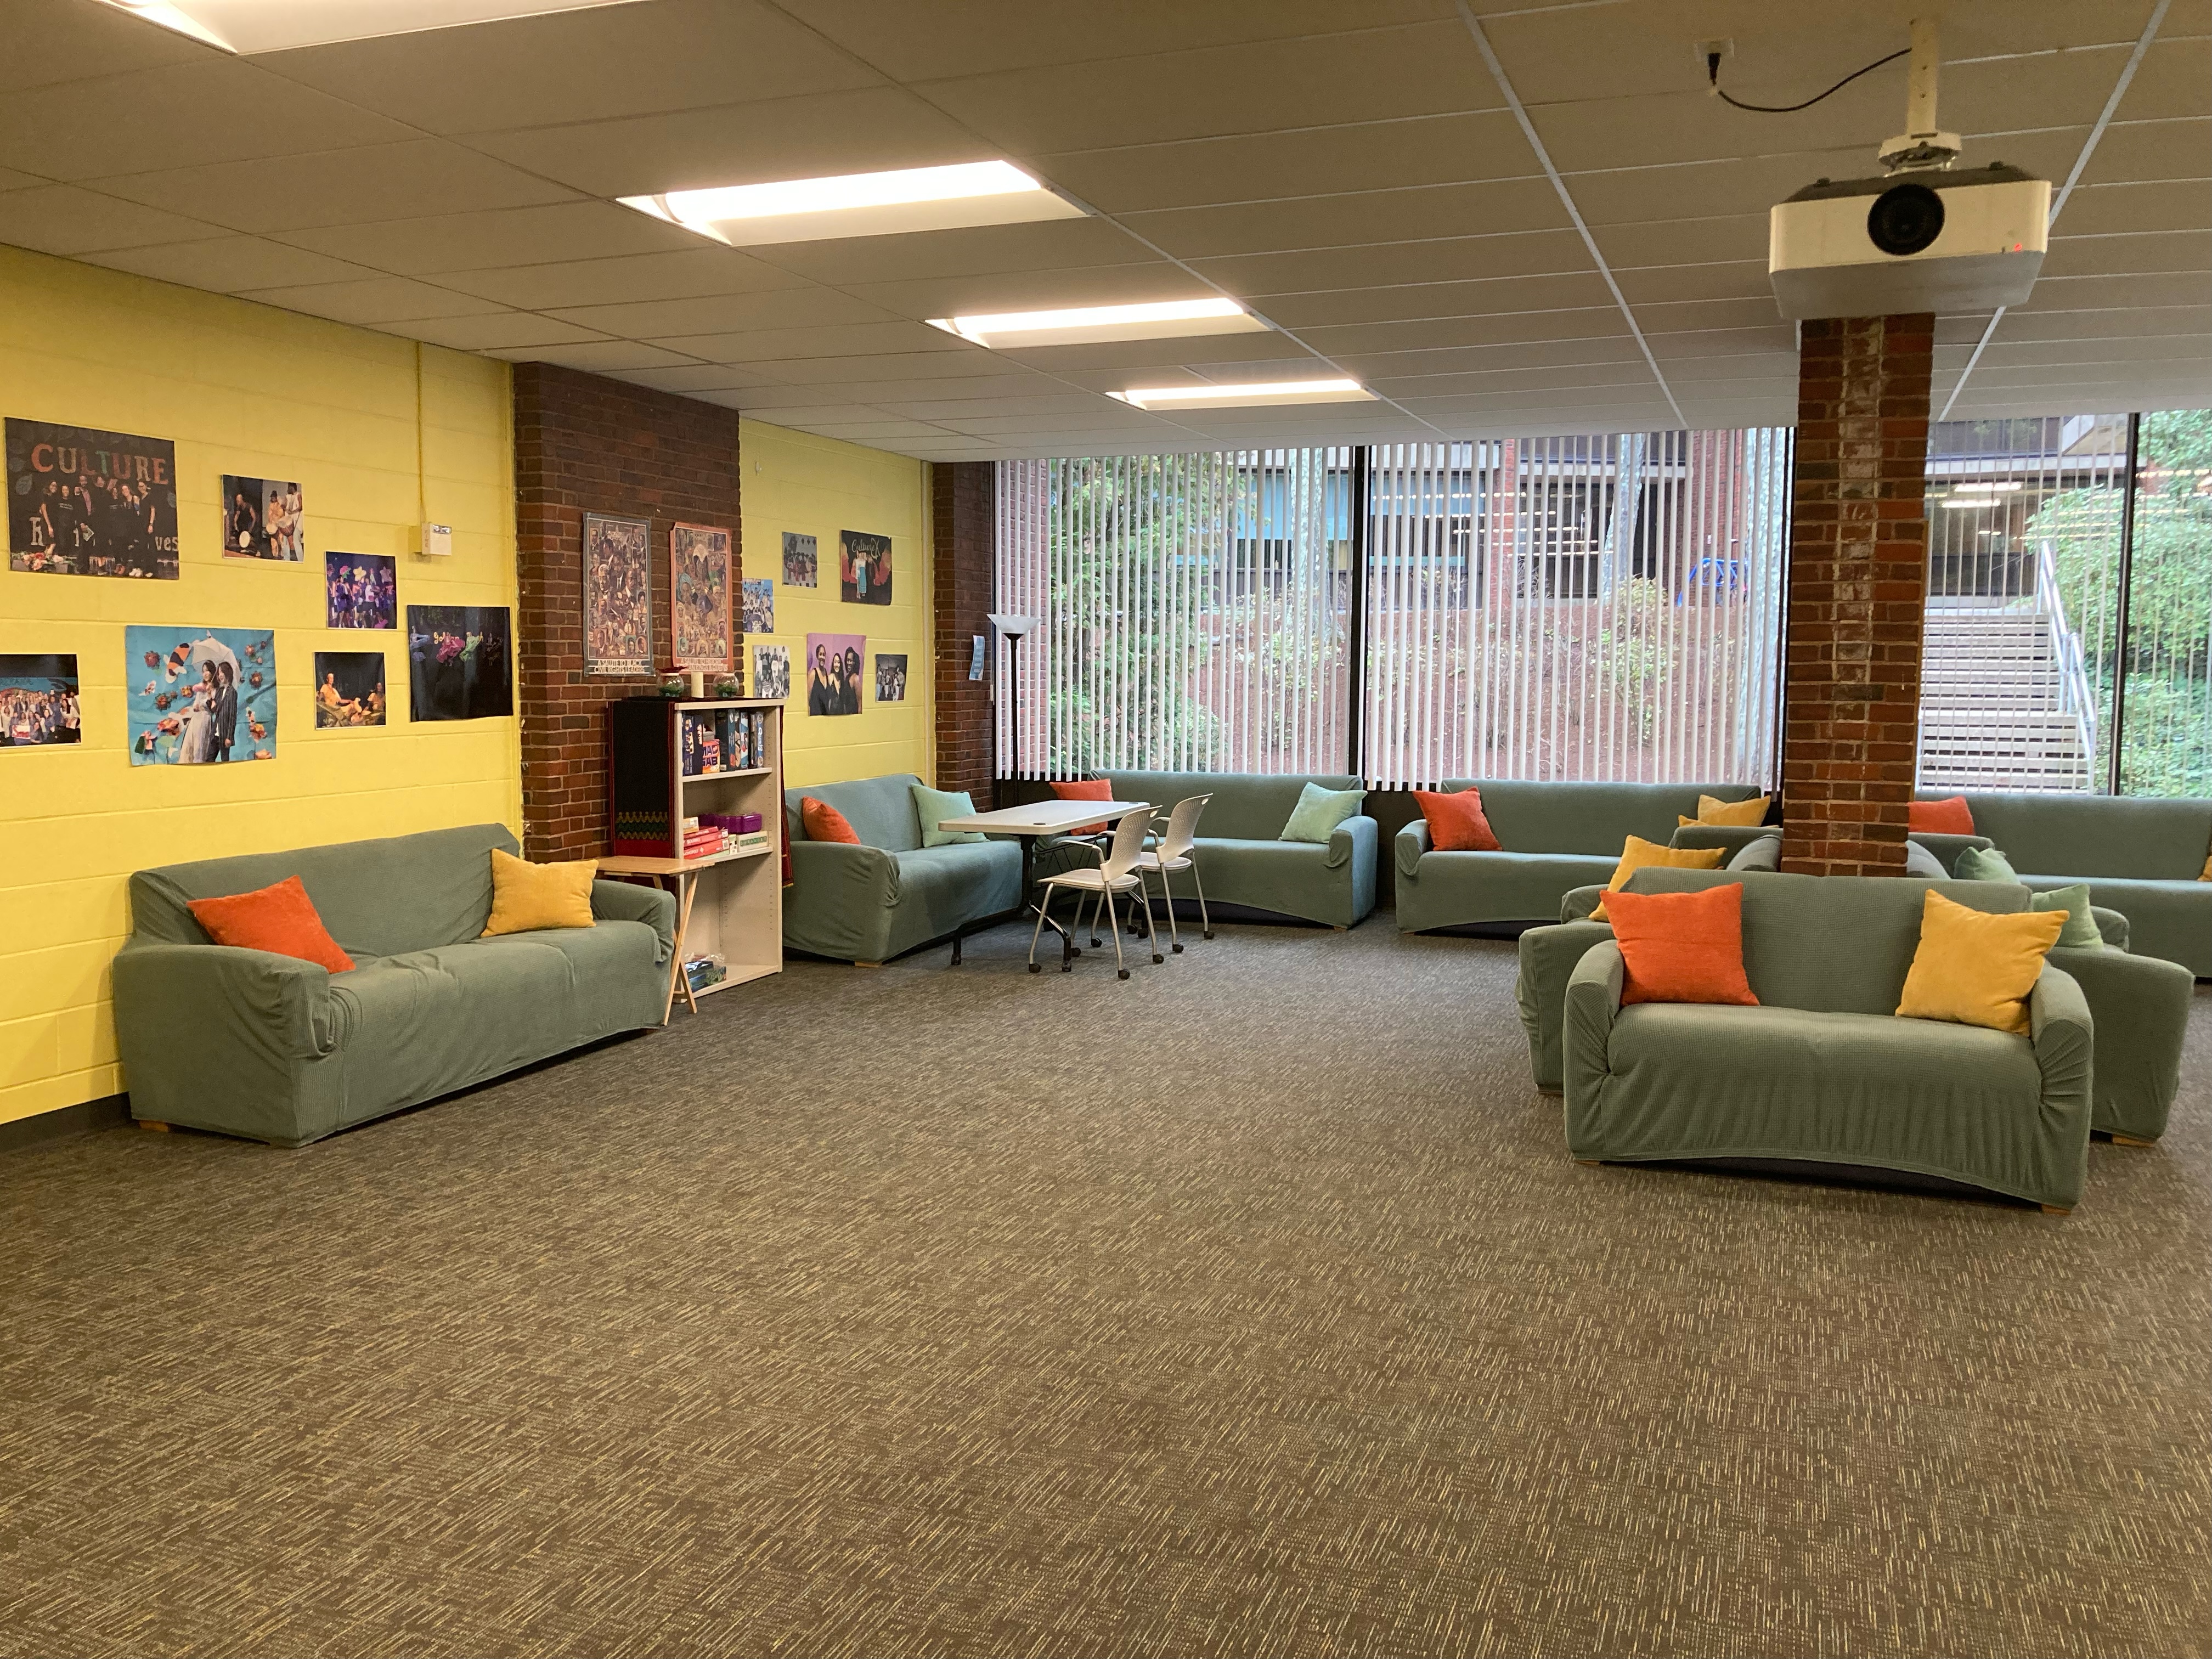 Open space with blue couches against a brick wall